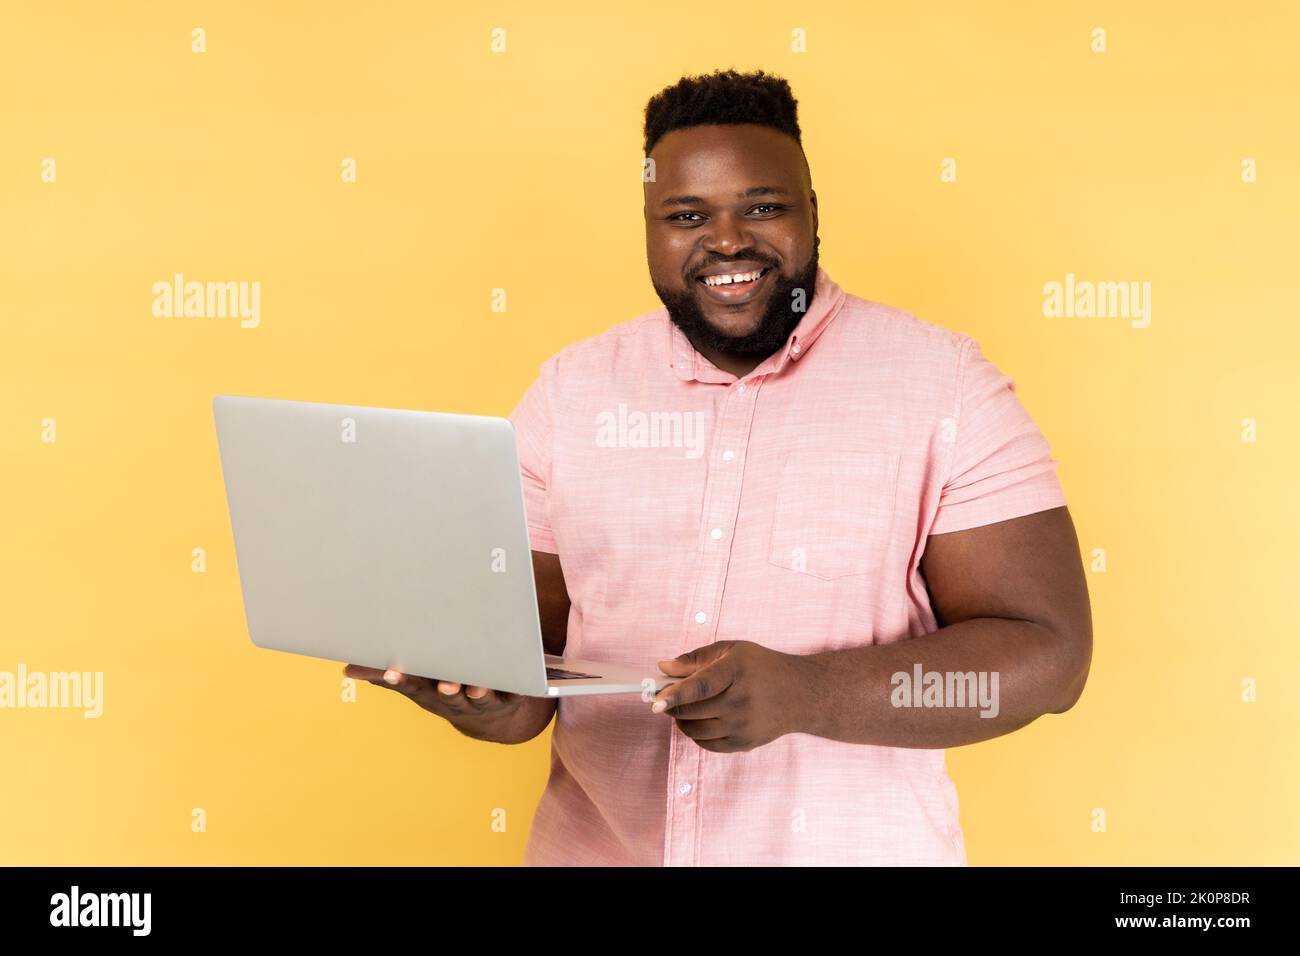 Portrait of smiling freelancer man wearing pink shirt standing and holding laptop, satisfied with teleworking, likes his job, looking at camera. Indoor studio shot isolated on yellow background. Stock Photo